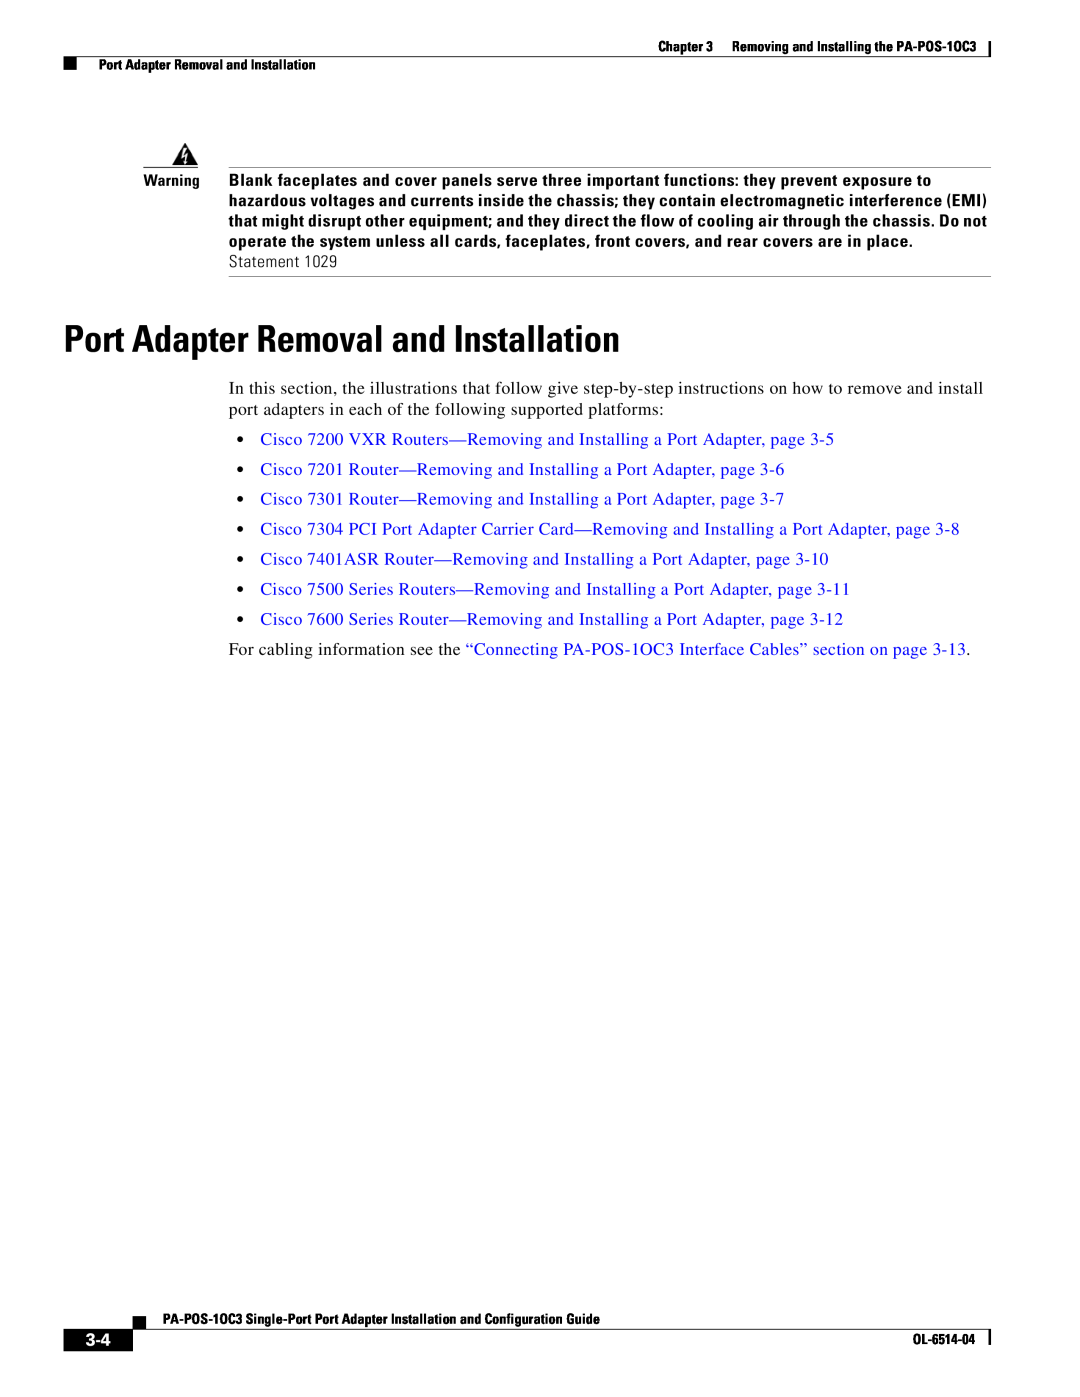 Cisco Systems PA-POS-2OC3, PA-POS-1OC3 manual Port Adapter Removal and Installation 